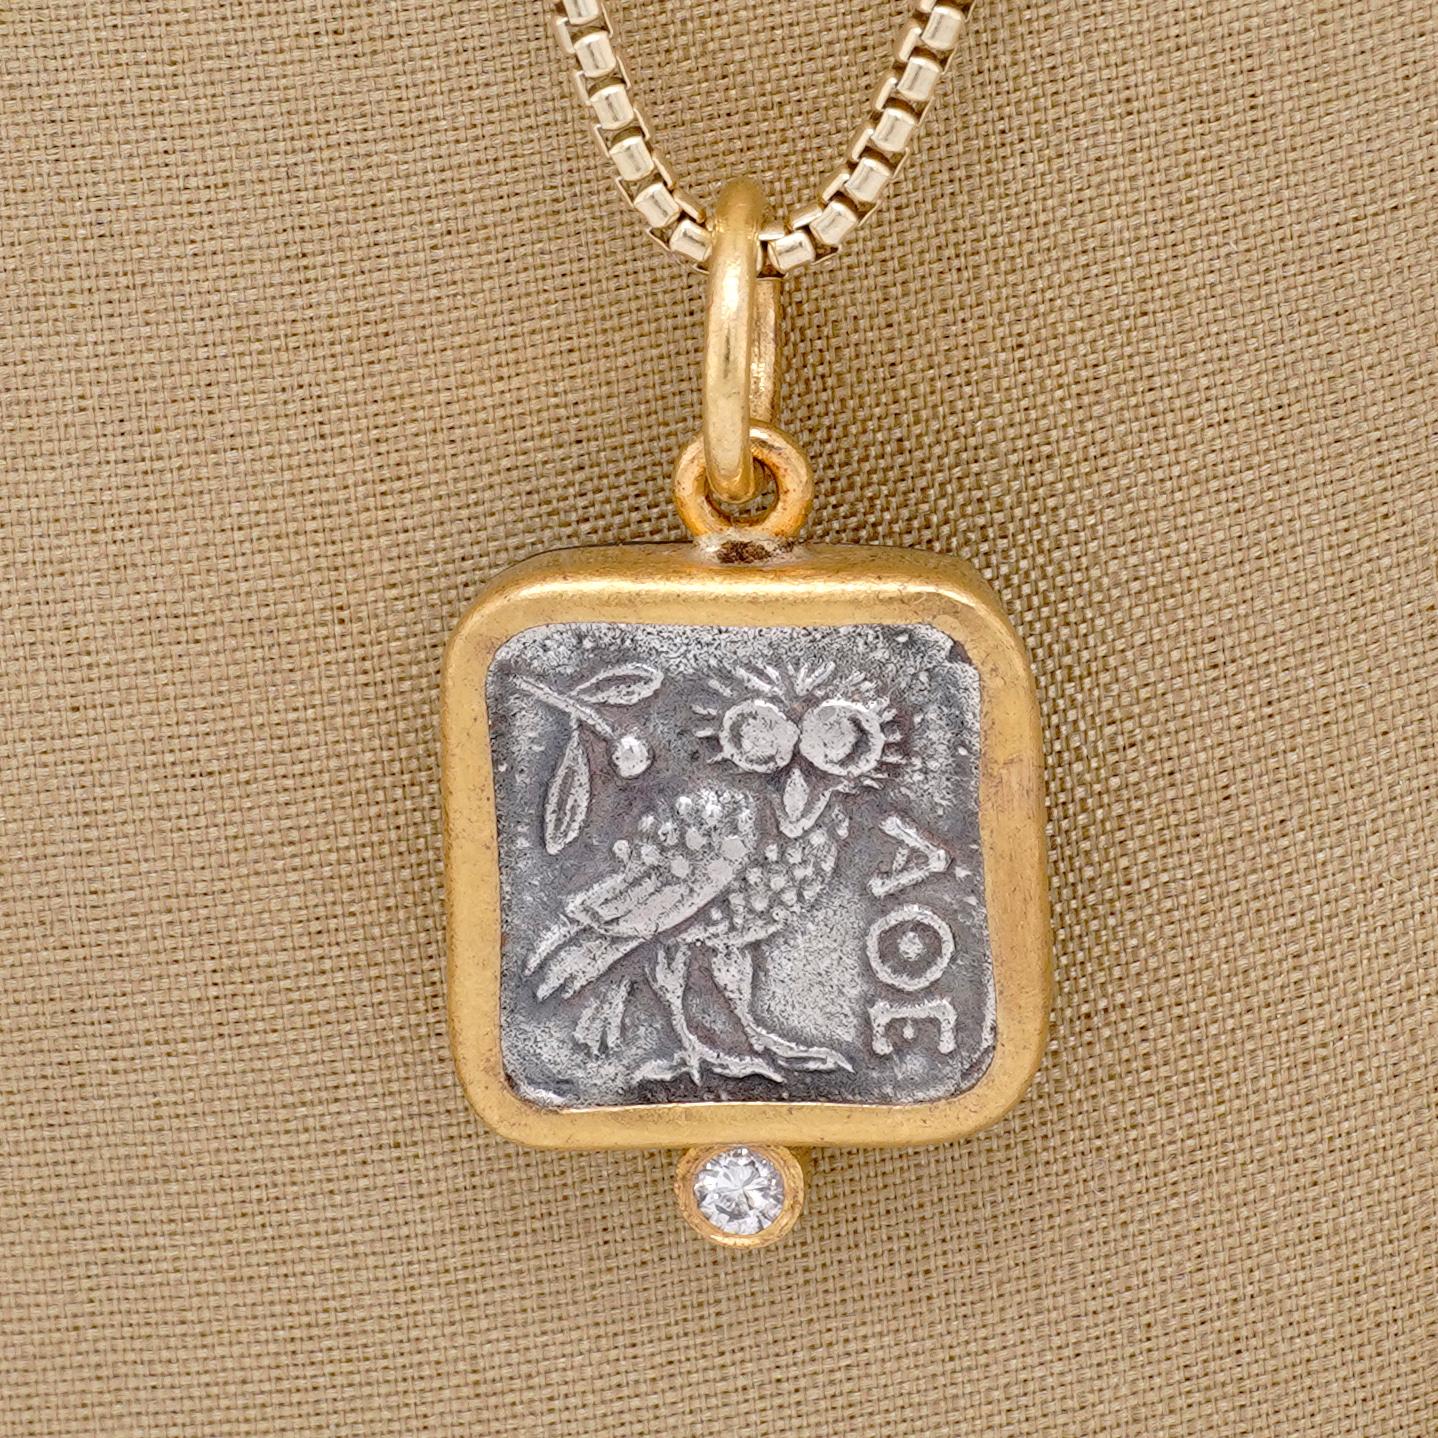 Contemporary Athena's Owl with Diamond, Square, Coin Charm Amulet Pendant Necklace, 24kt Gold